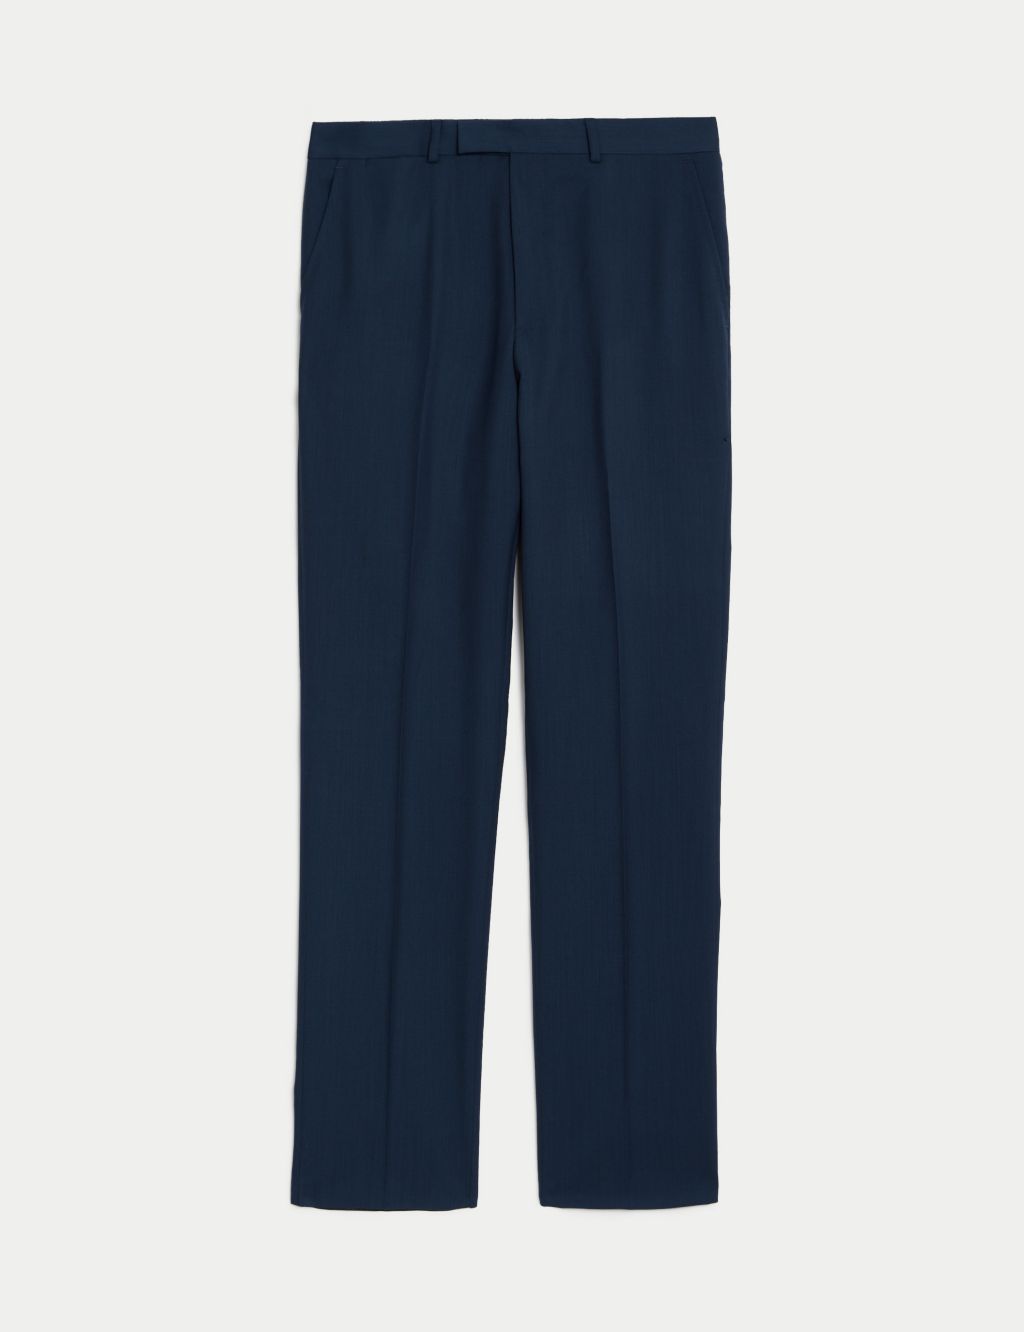 Tailored Fit Pure Wool Twill Trousers image 1